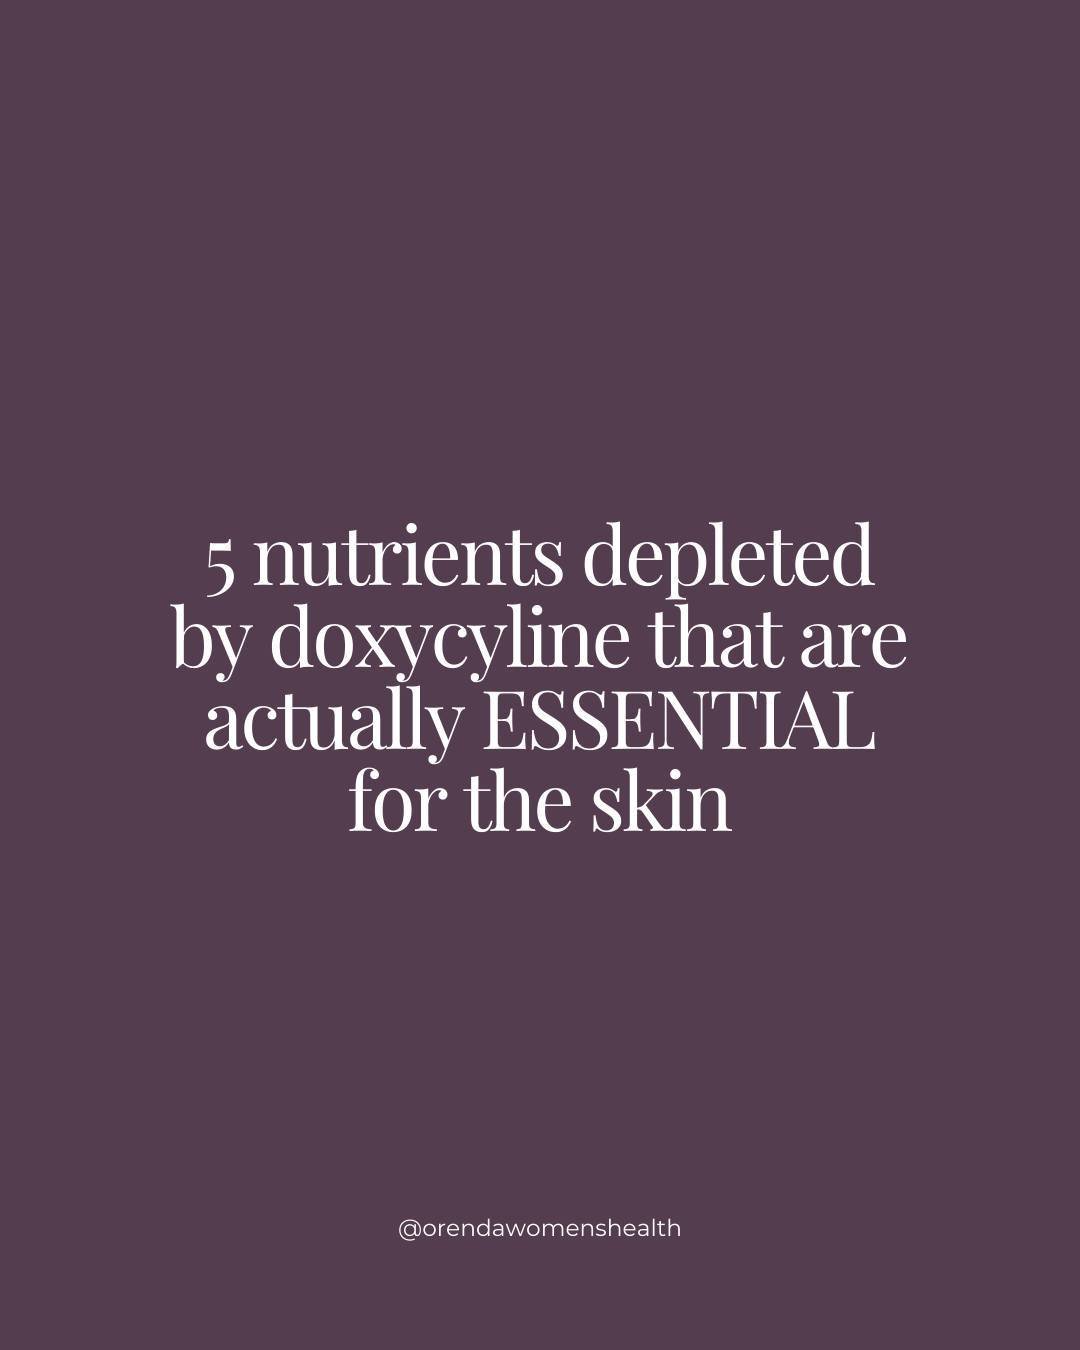 Are you or your client taking Doxycycline? Here's what nutrients you could be missing out on... 

- Calcium
- Magnesium
- Iron
- Zinc
- Vitamin B12

___